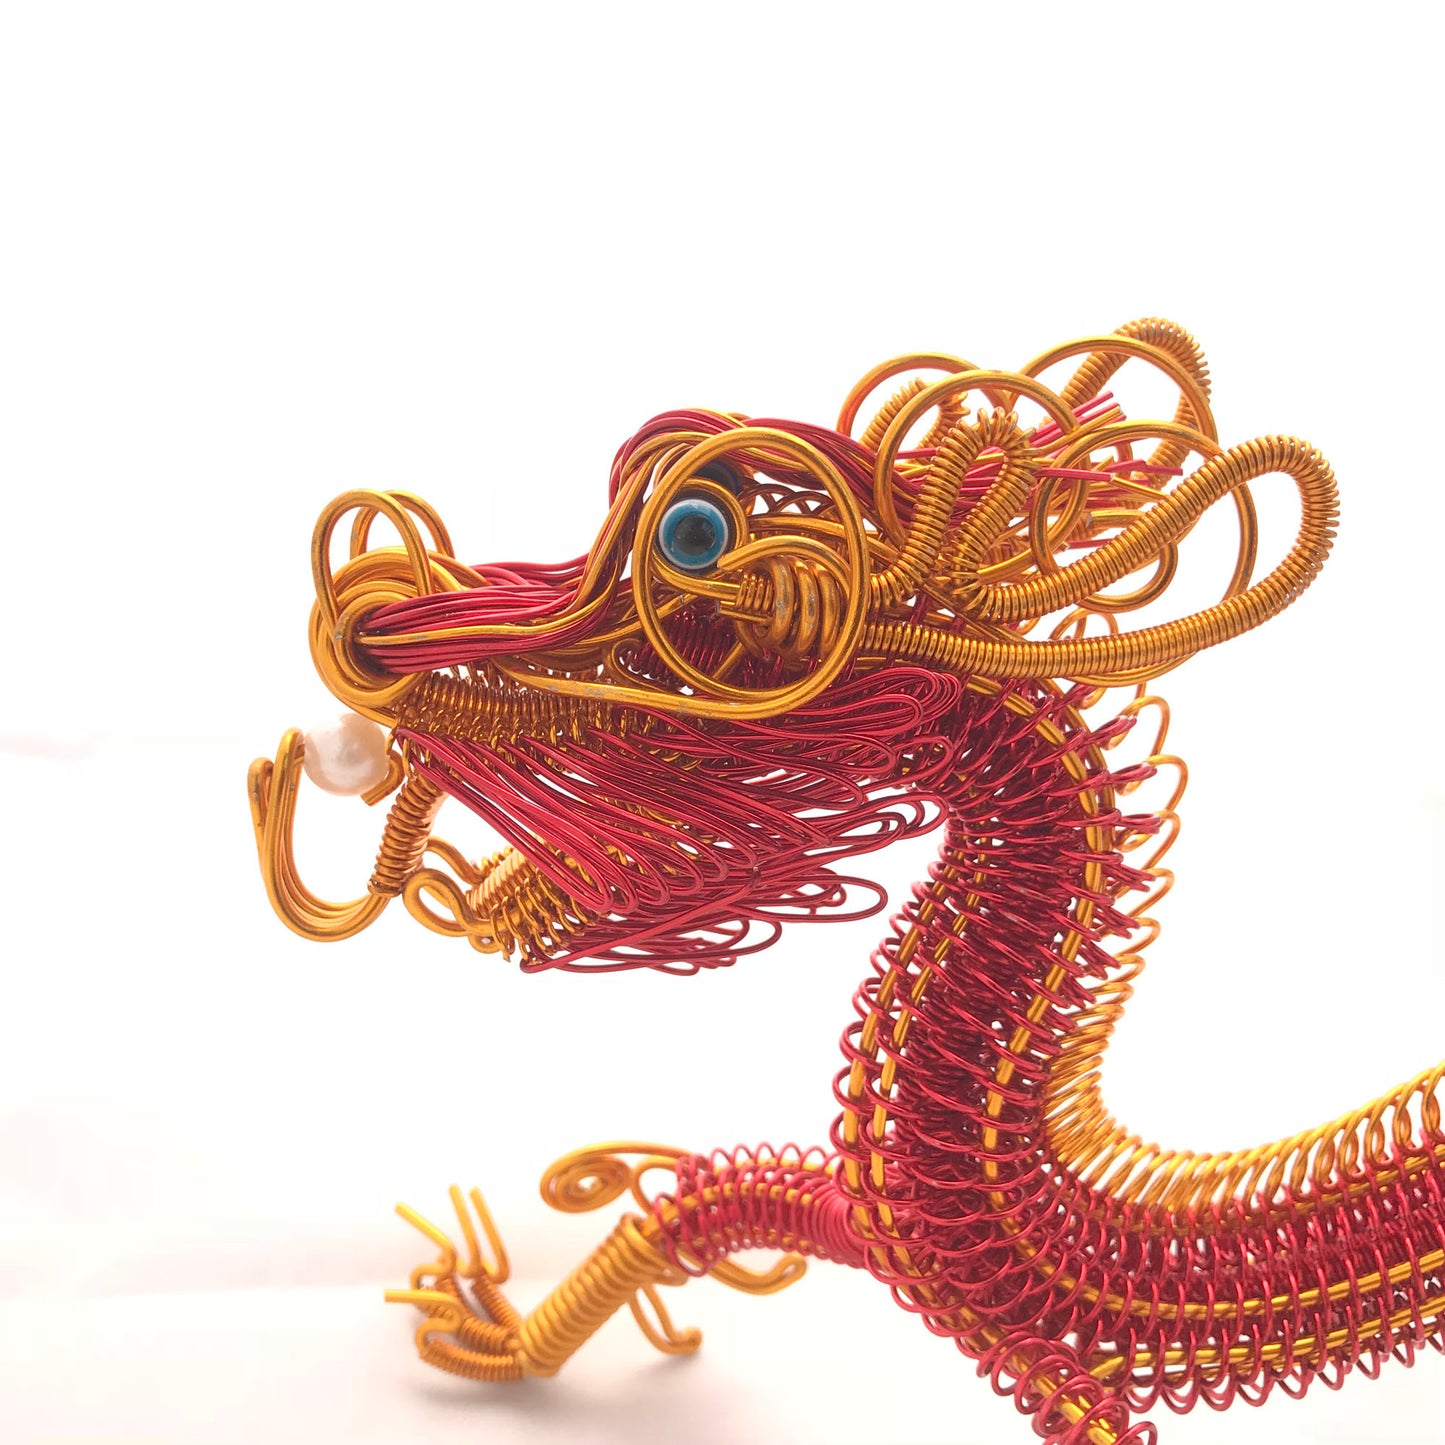 Hand-crafted wire art dragon